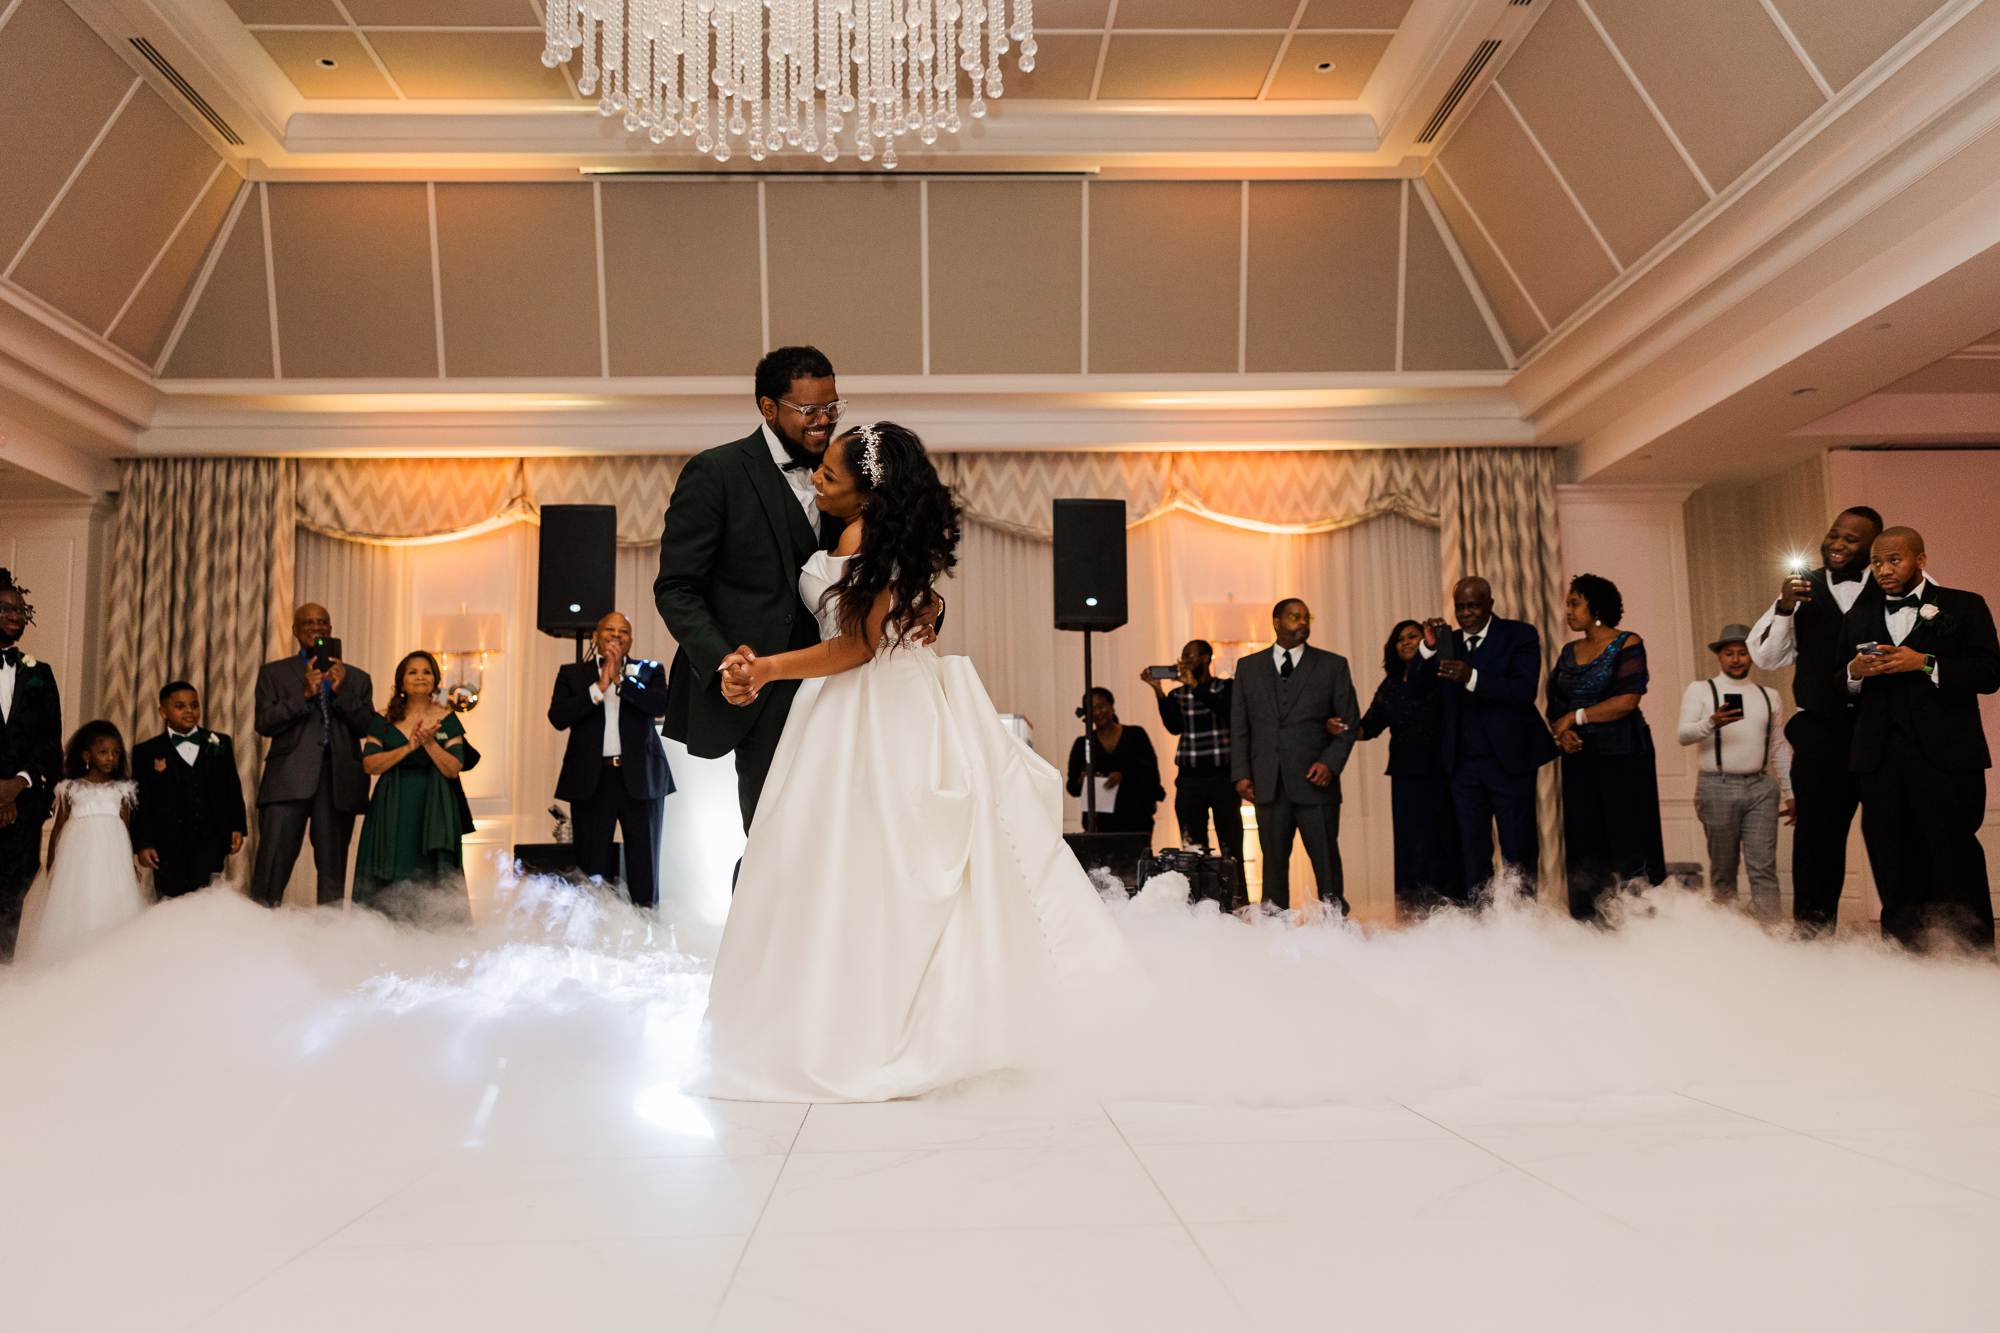 Dreamy New Jersey Wedding Photos at Edgewood Country Club in Fall